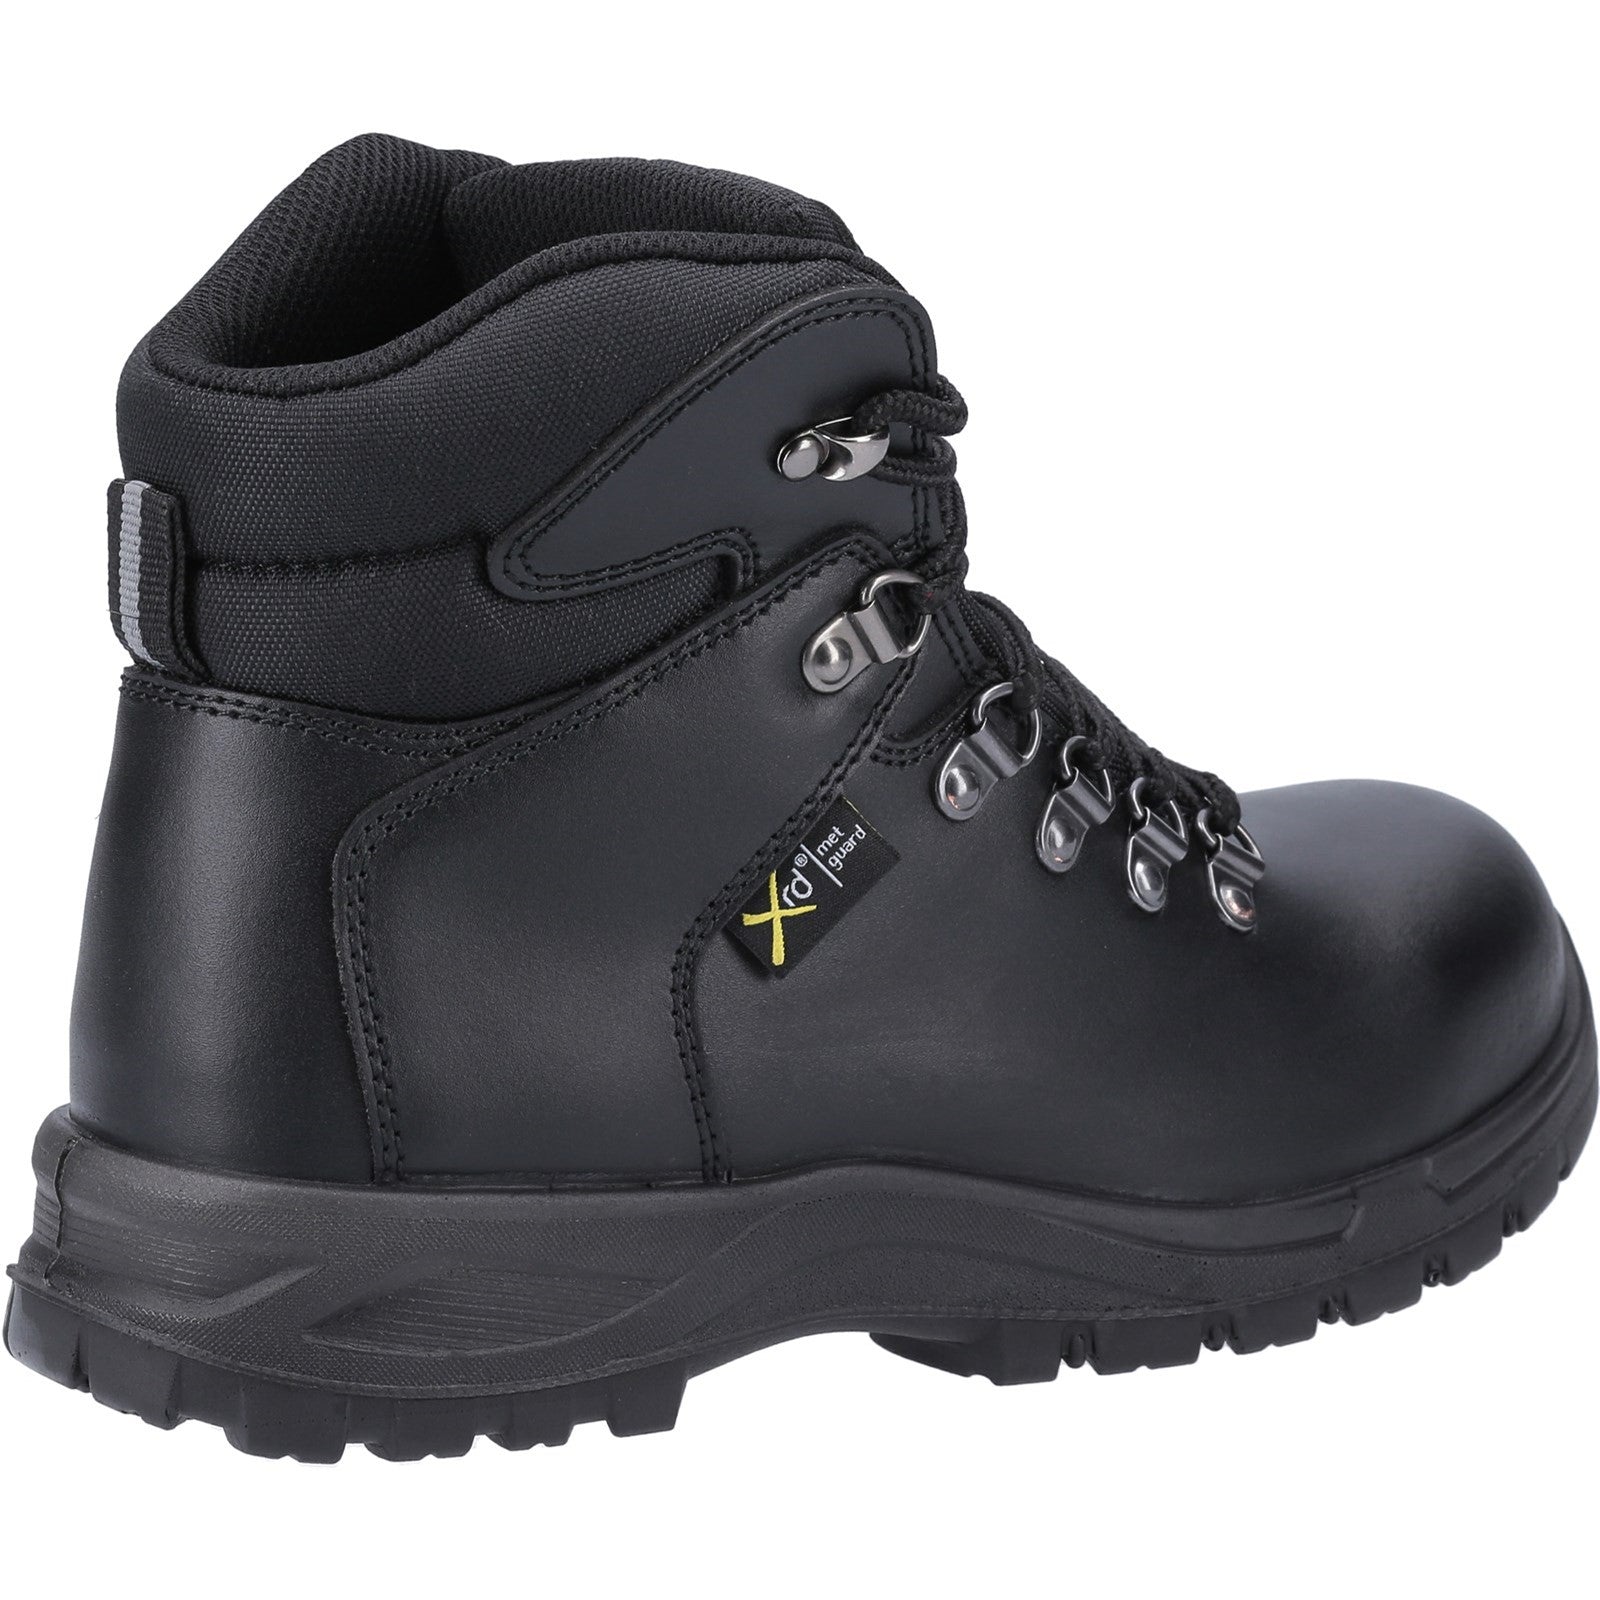 Amblers AS606 Safety Boots